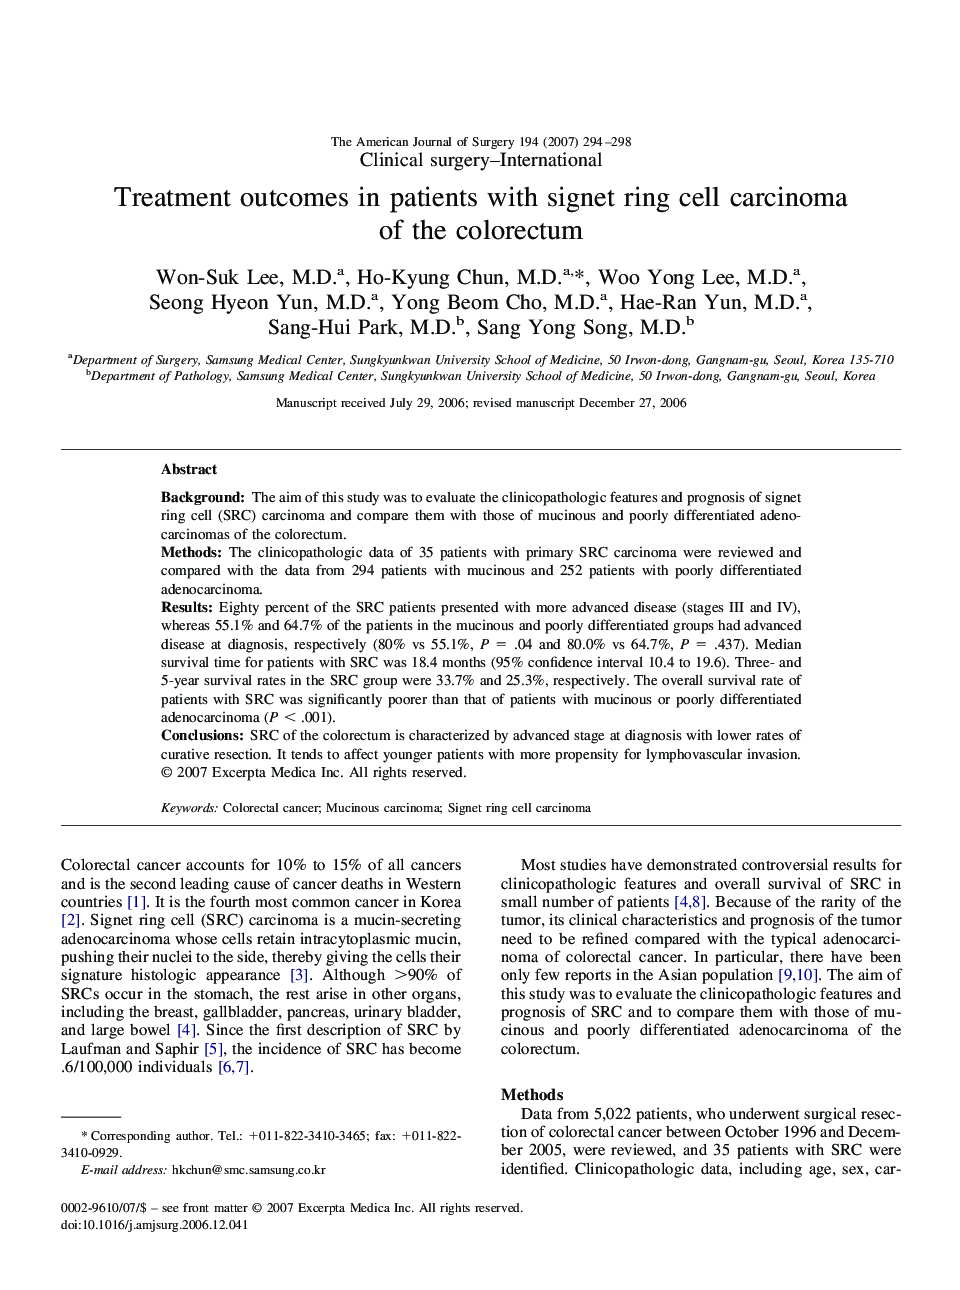 Treatment outcomes in patients with signet ring cell carcinoma of the colorectum